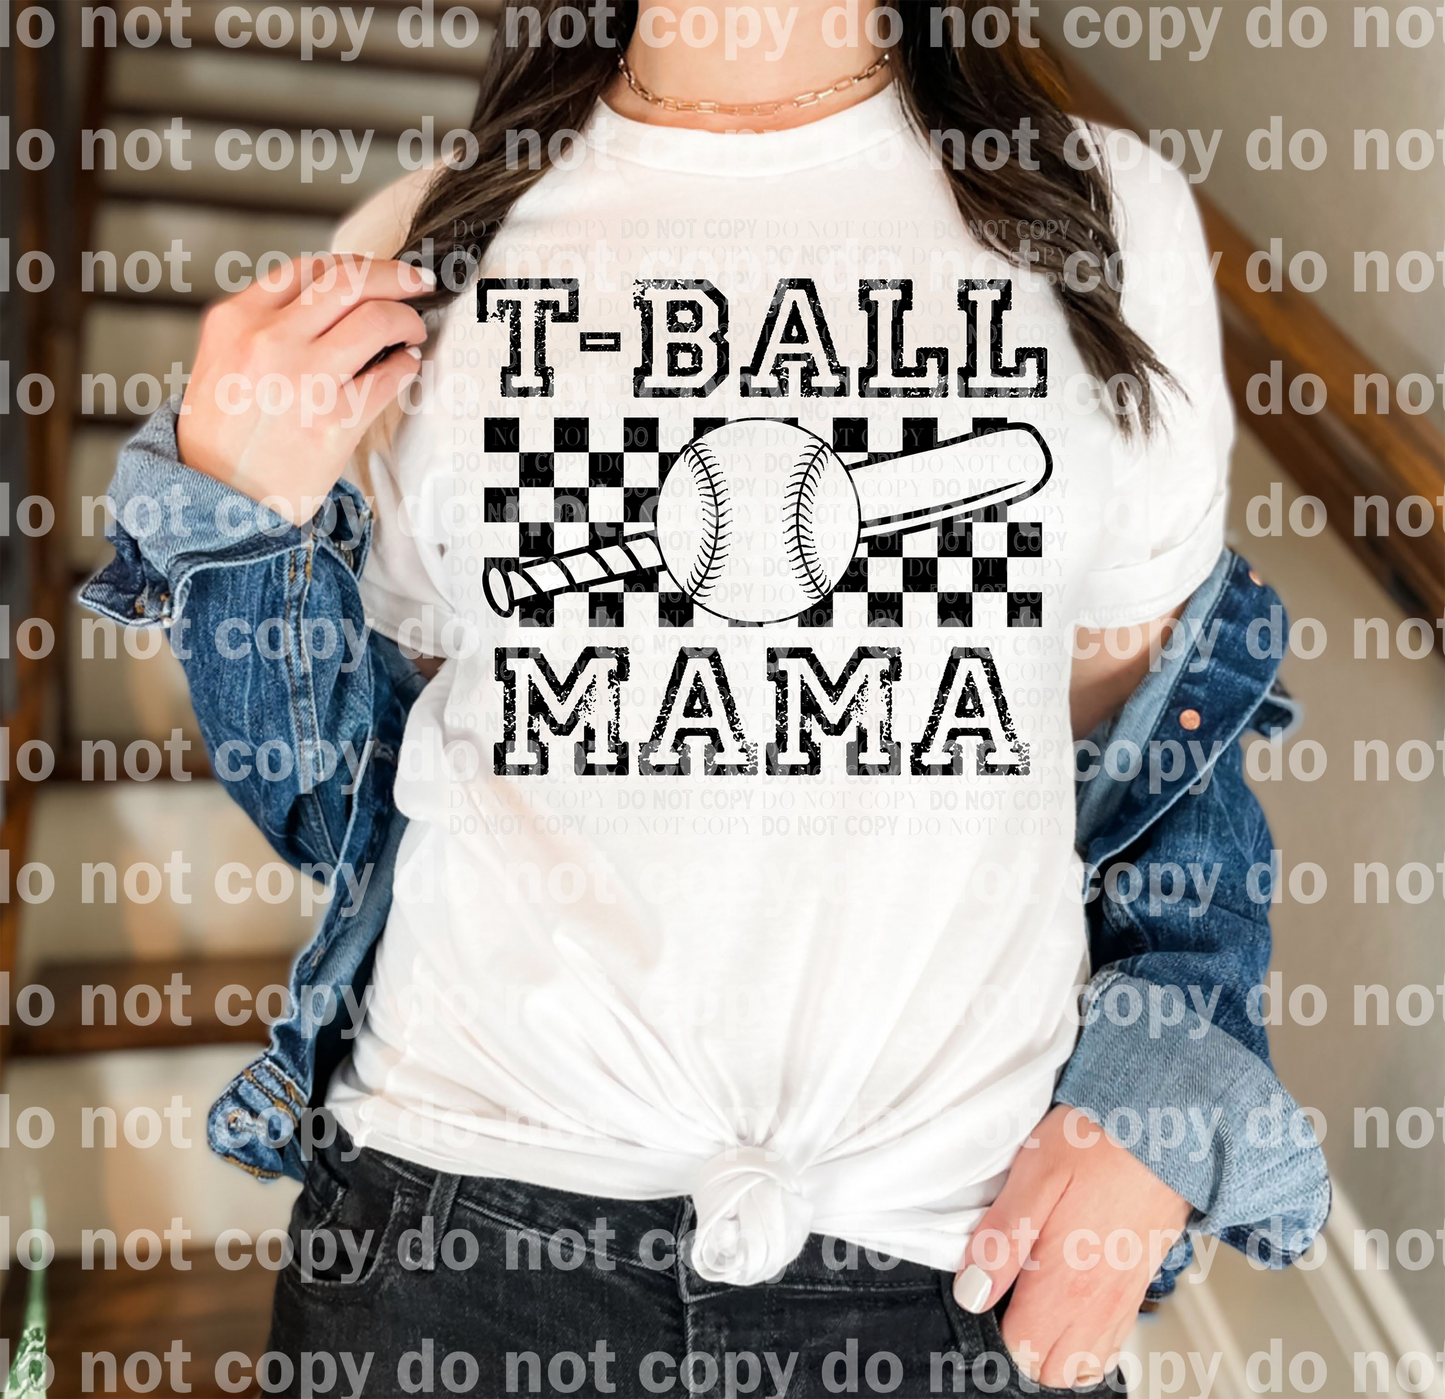 T-Ball Mama Full Color/One Color Dream Print or Sublimation Print